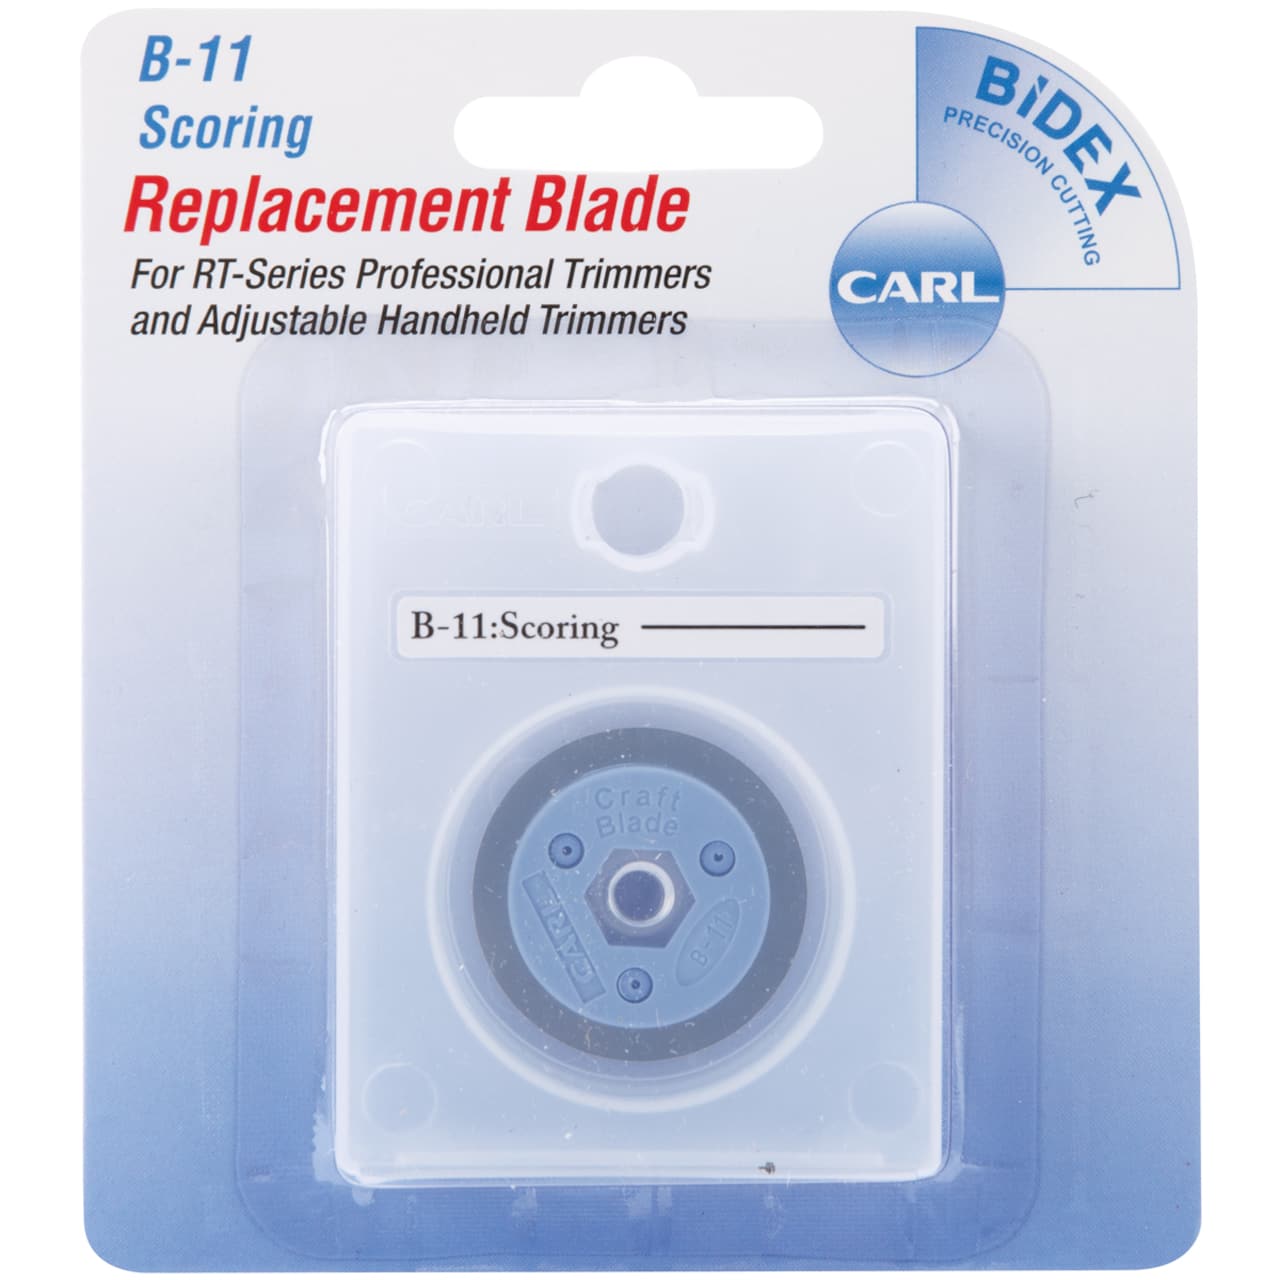 Carl&#xAE; Professional Rotary Trimmer Scoring Replacement Blade For RT-200